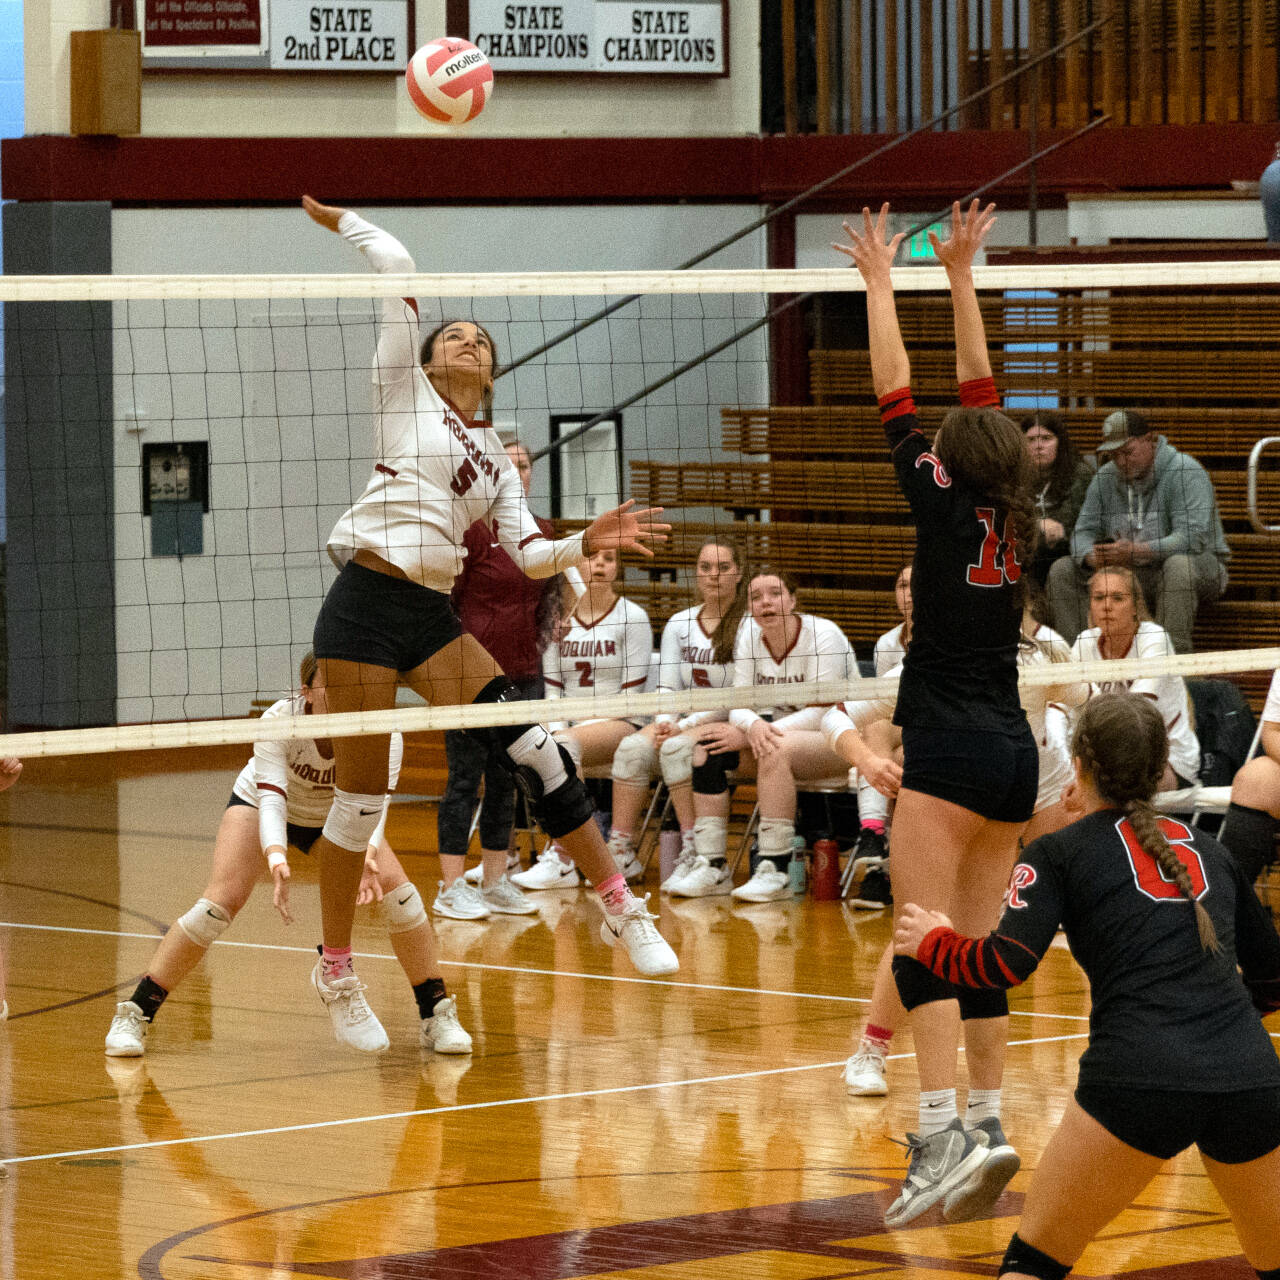 PHOTO BY PATTY REYNVAAN
Hoquiam’s Chloe Kennedy (5) smacks a kill while Raymond’s Alia Enlow (10) defends during the Grizzlies’ straight-set victory on Monday in Hoquiam. Below, Hoquiam’s Ashlinn Cady digs the ball during the match.